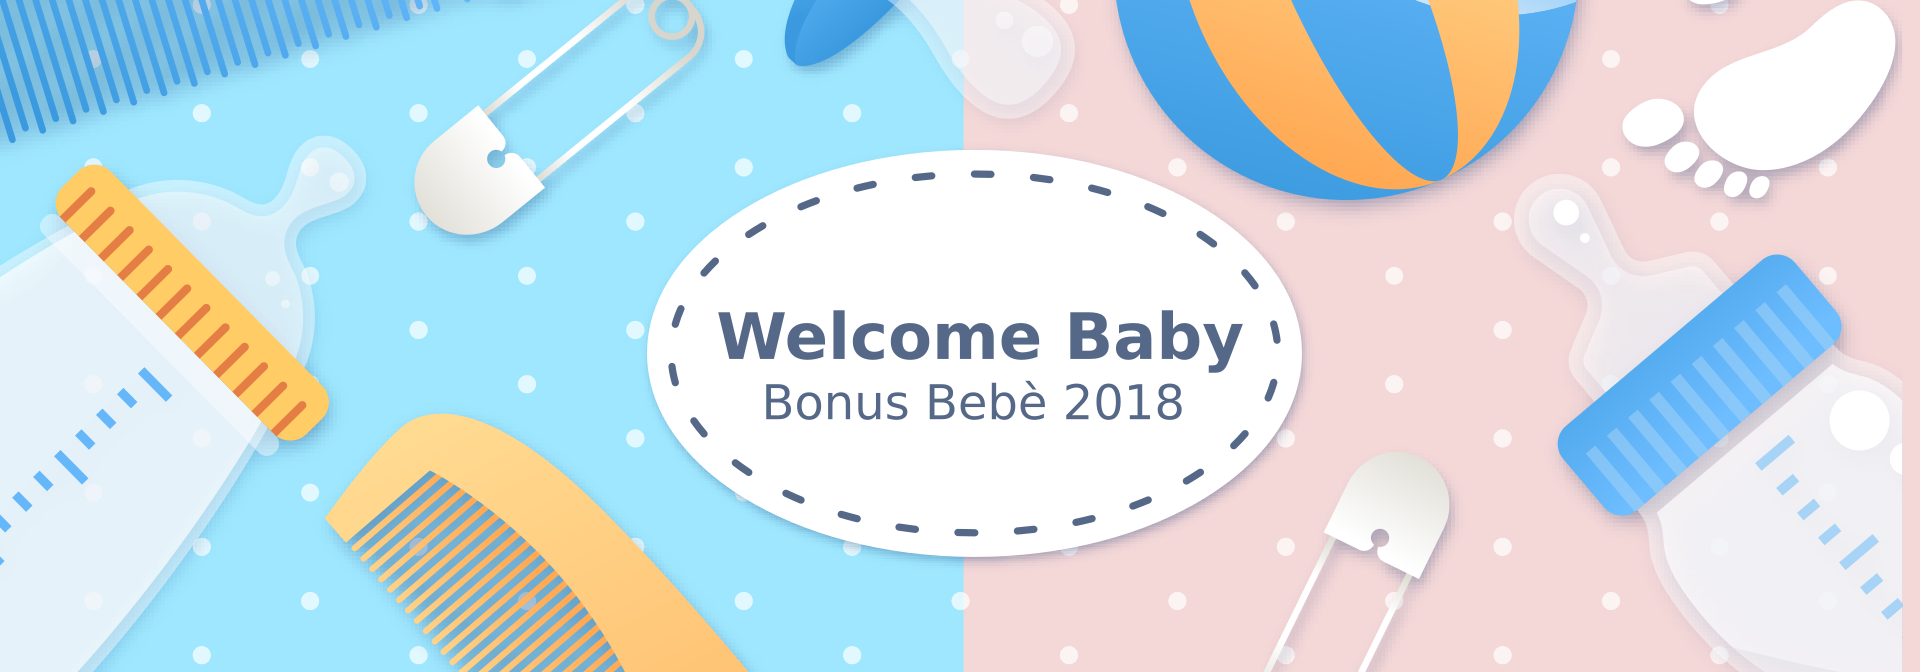 Banner - Welcome Baby 2018 - Blu e Rosa